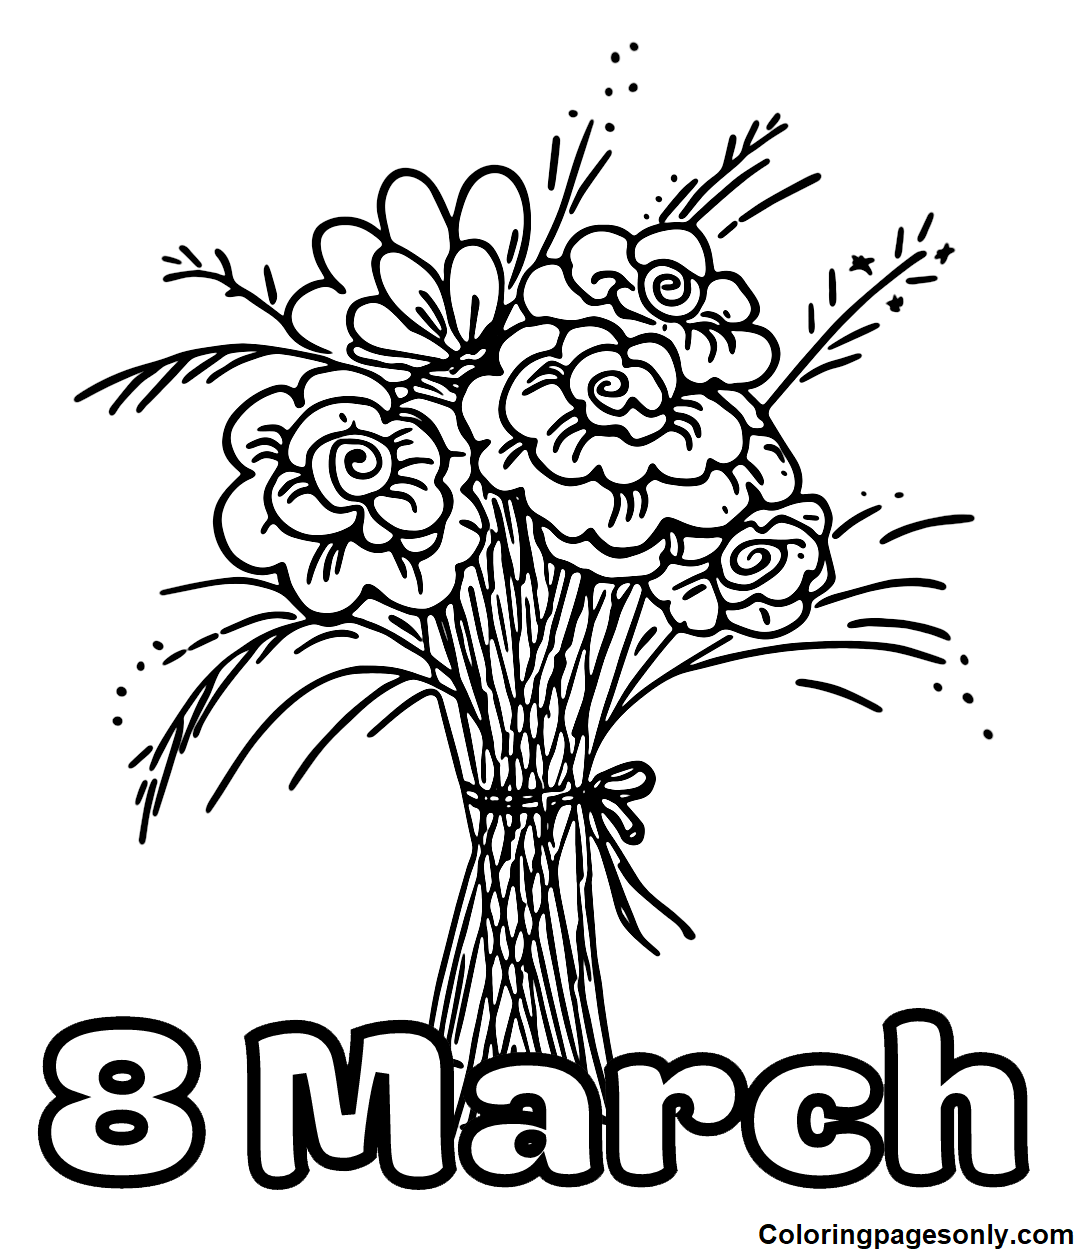 8 March Image Coloring Pages